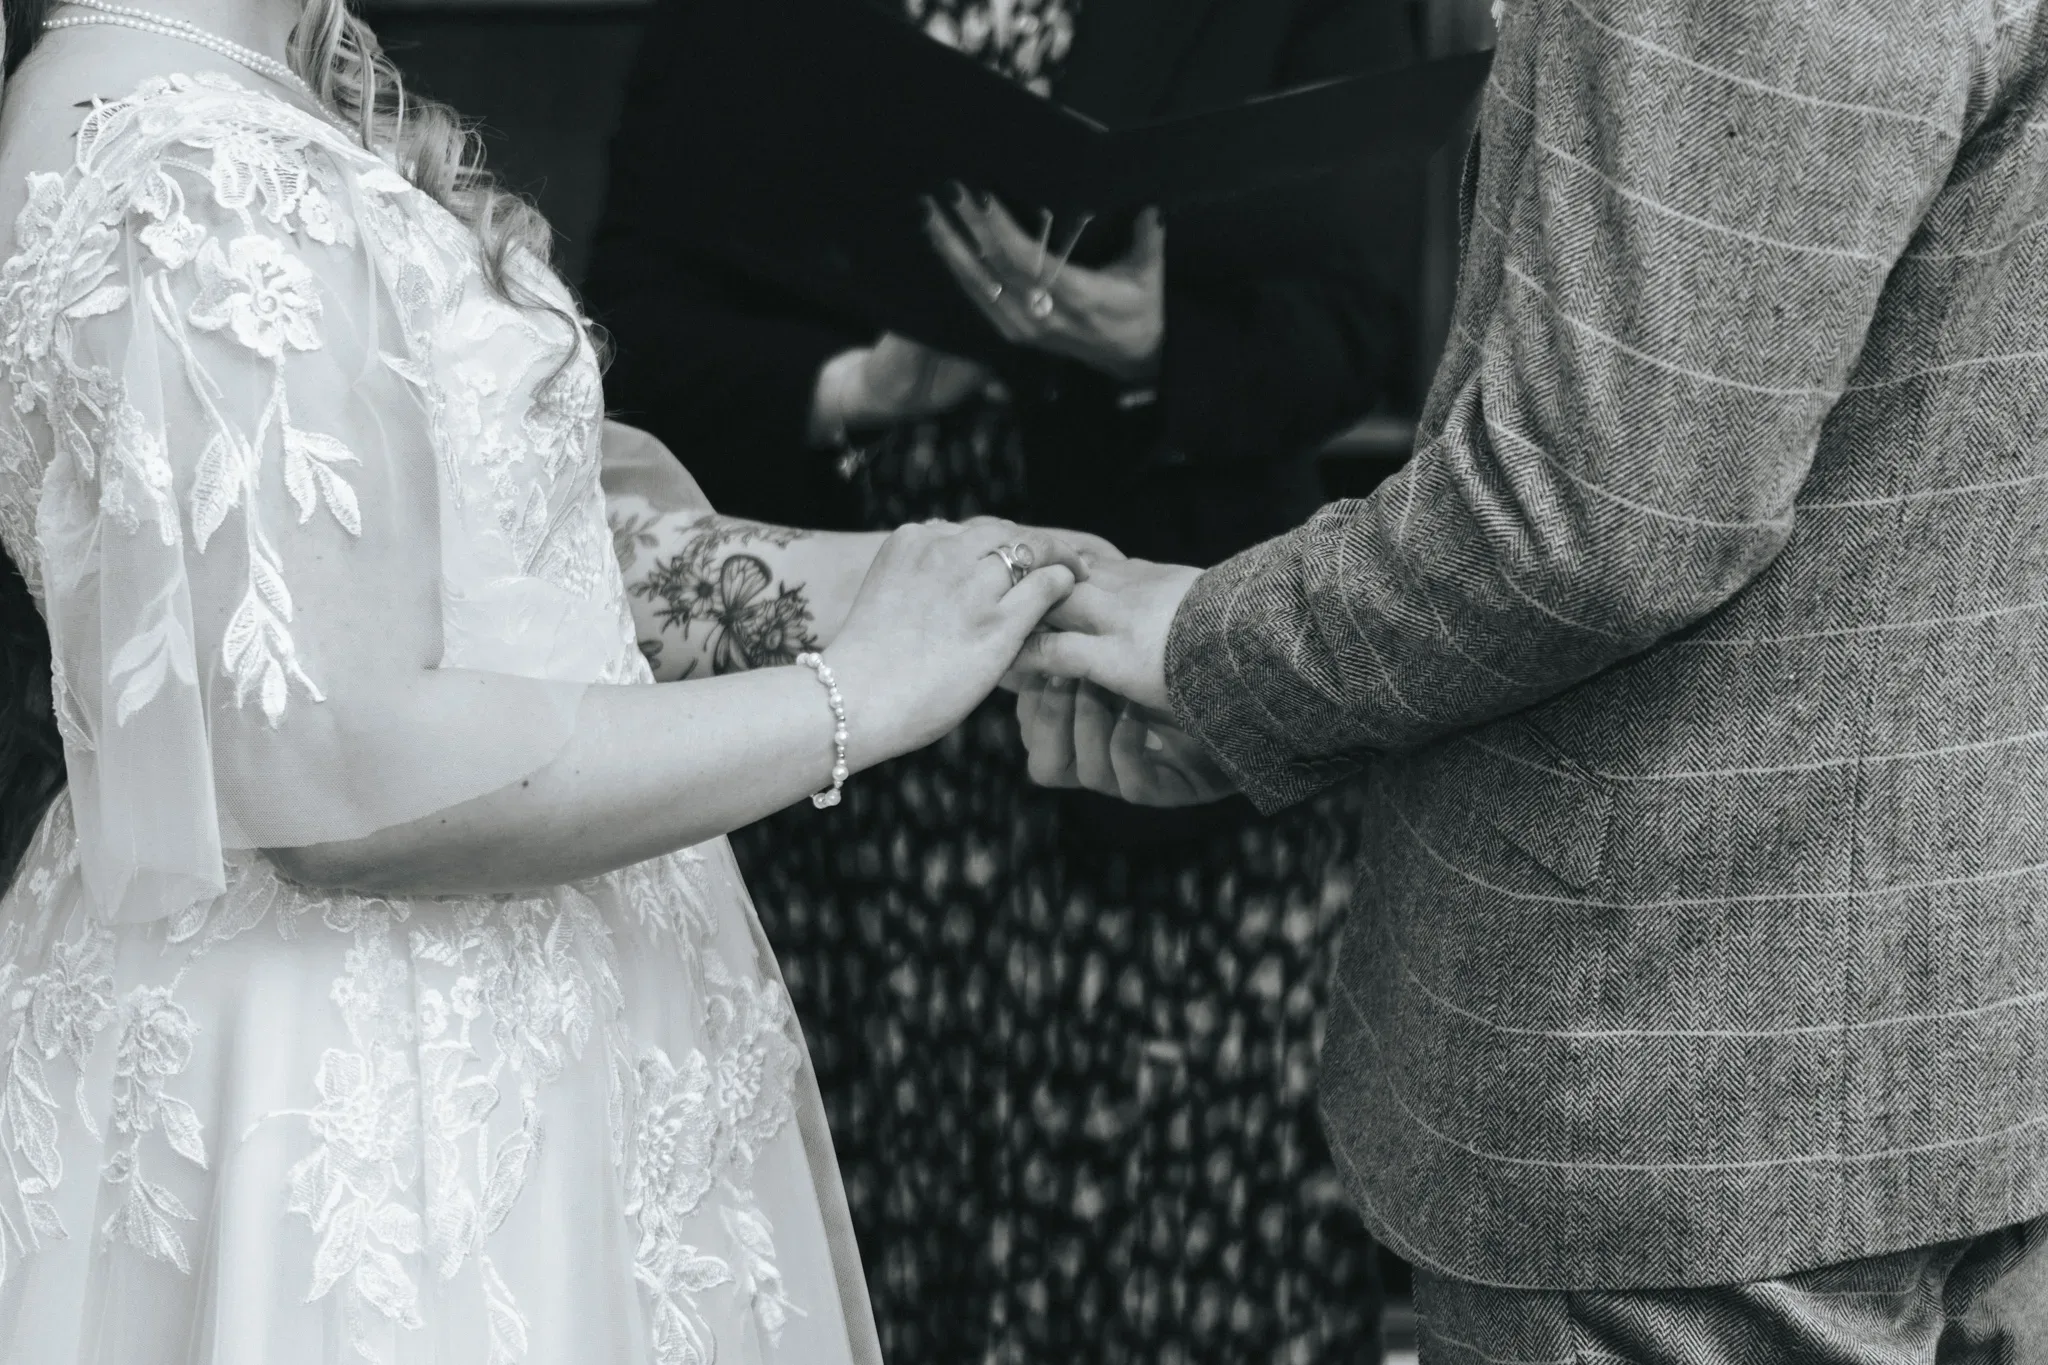 A bride and groom hold hands during a wedding ceremony. the bride, in a white dress with lace sleeves, displays a tattoo on her arm, while the groom wears a gray tweed suit. a person officiating the ceremony stands in the background.